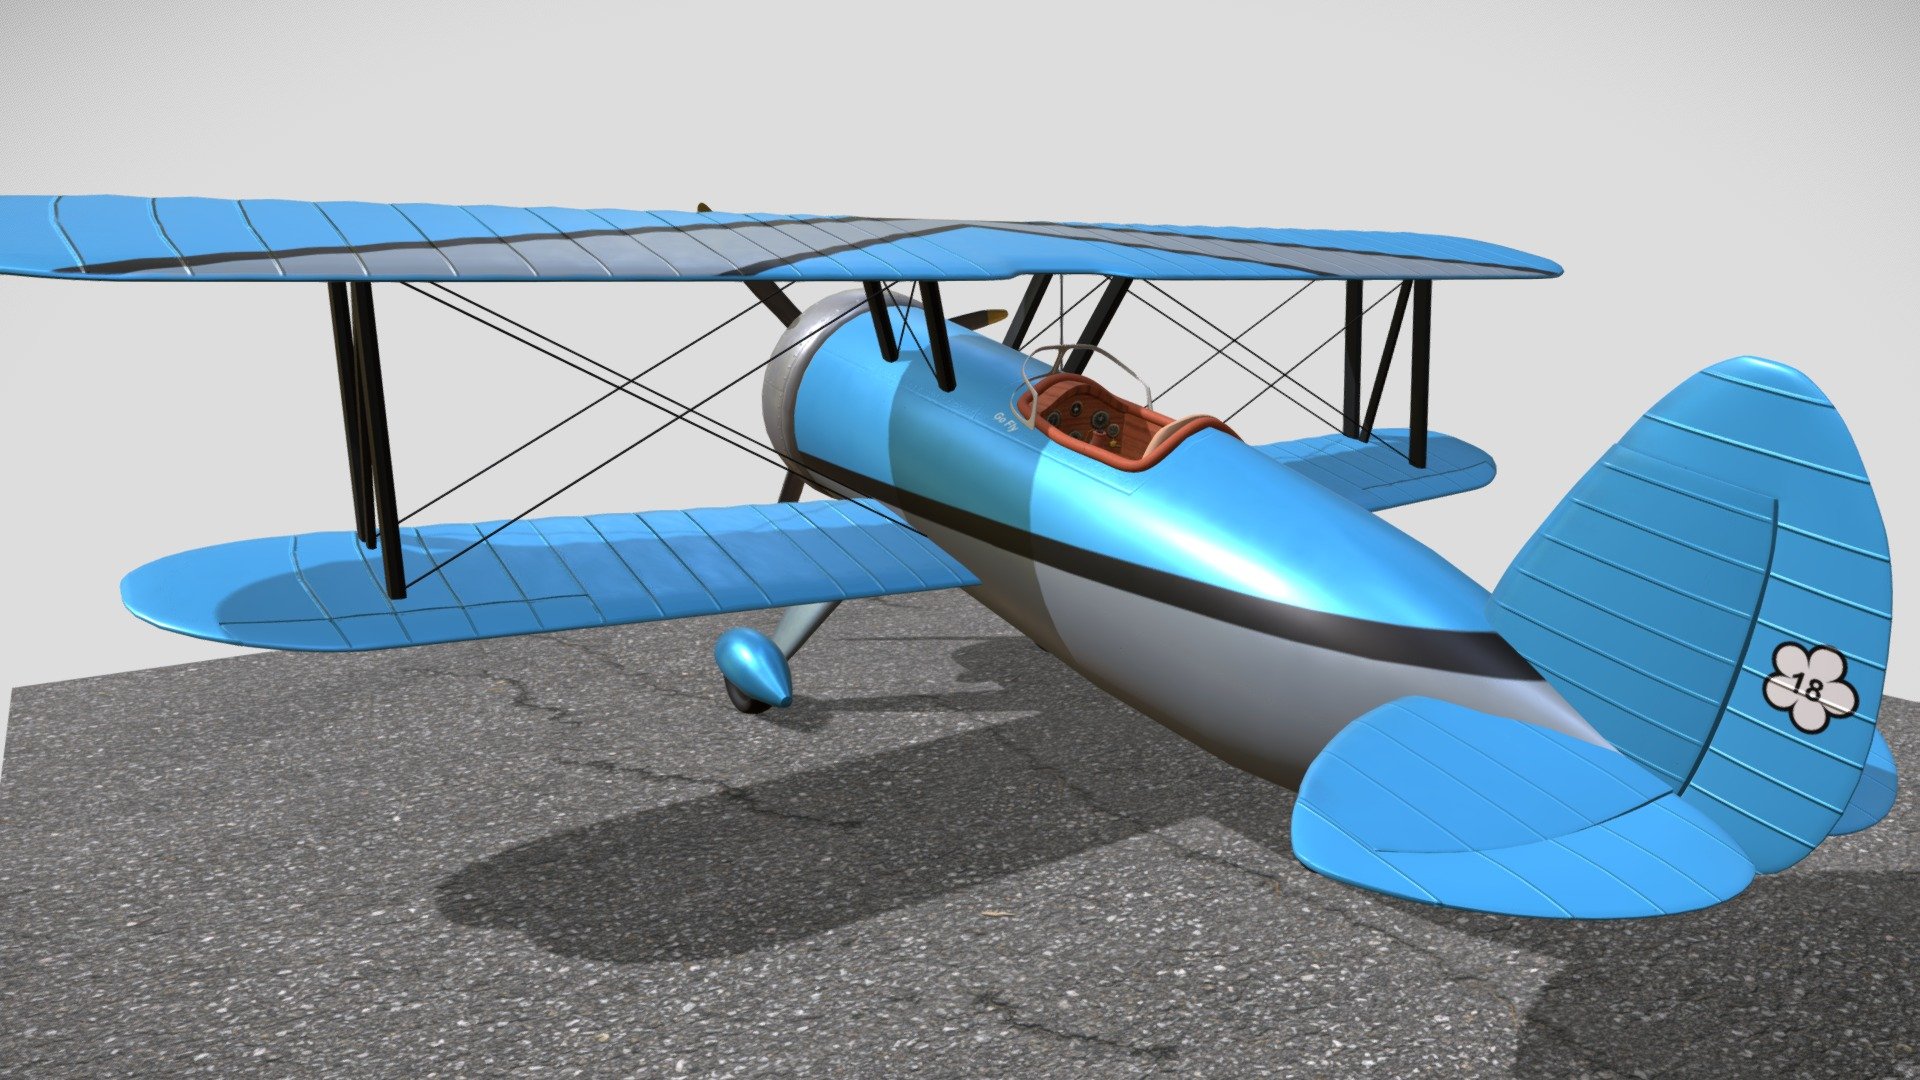 Stylized plane with hand painted 4k textures- Diffuse, Roughness, Metal, Normal/ Bump. The model is inspired by the Boeing Sterman and the Pitts S12.

Game Ready- Model have been tested in UE5.

Stats:
Textures- 4096x4096, Diffuse, Roughness, Metal, Normal.
Vertices- 55743
Faces- 54863

Controll surfaces and other details are seperate objects for easy animation. This also inludes a .Blend file with the model 3d model